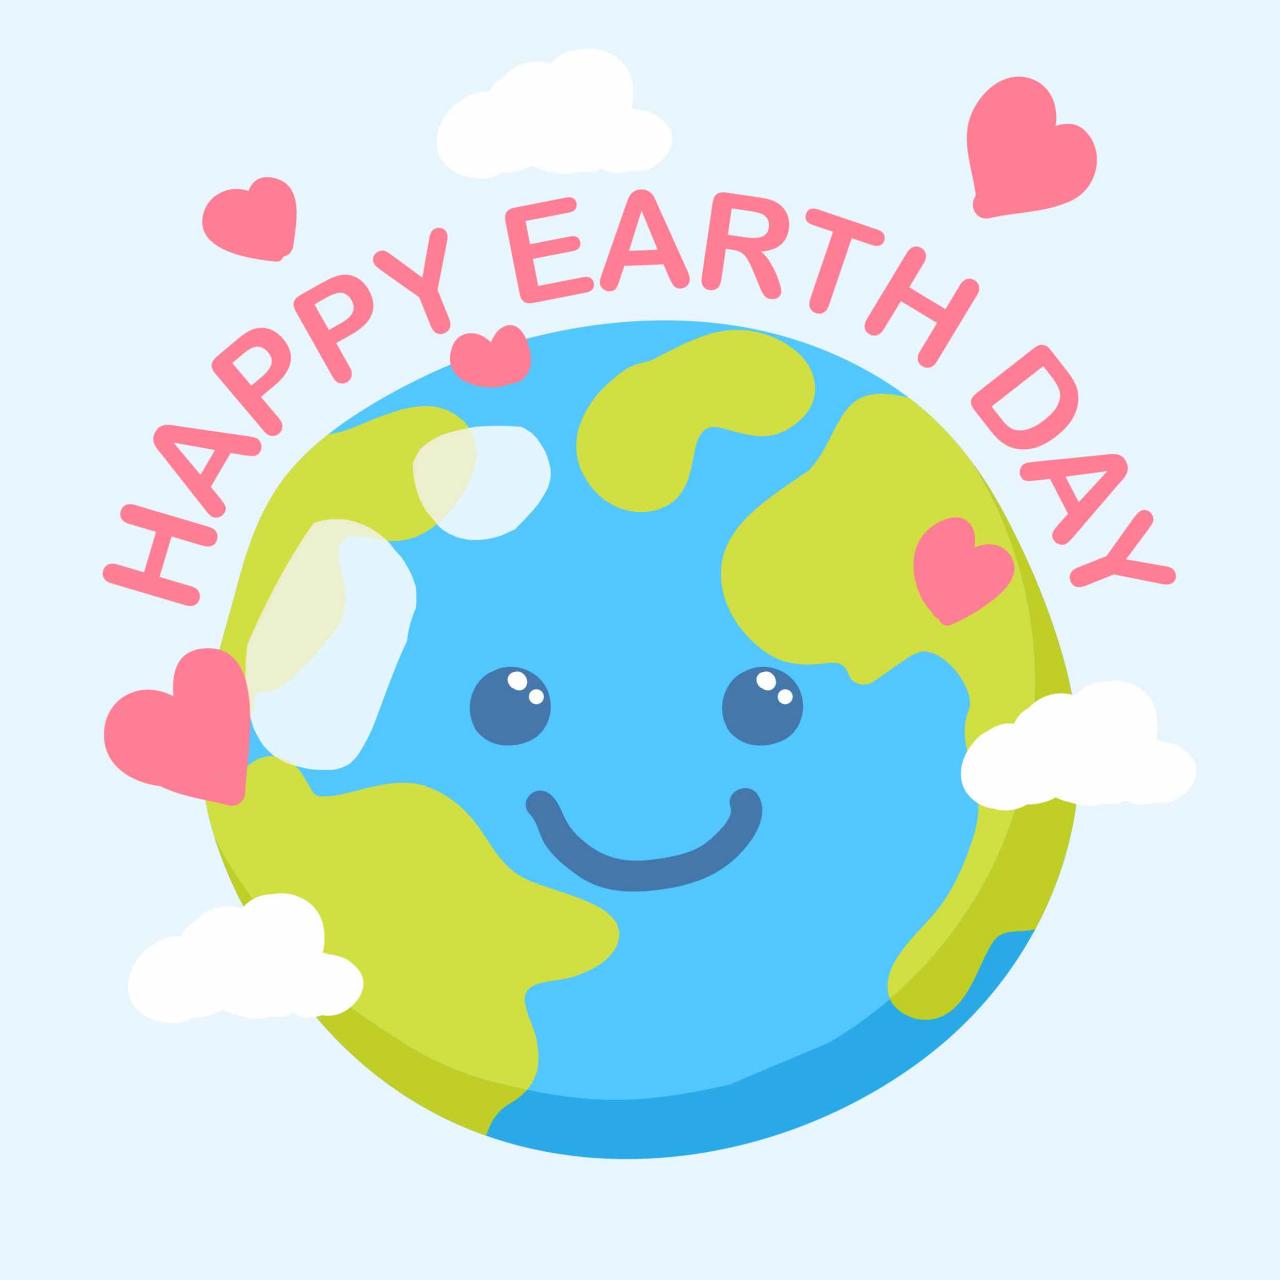 Happy earth day images